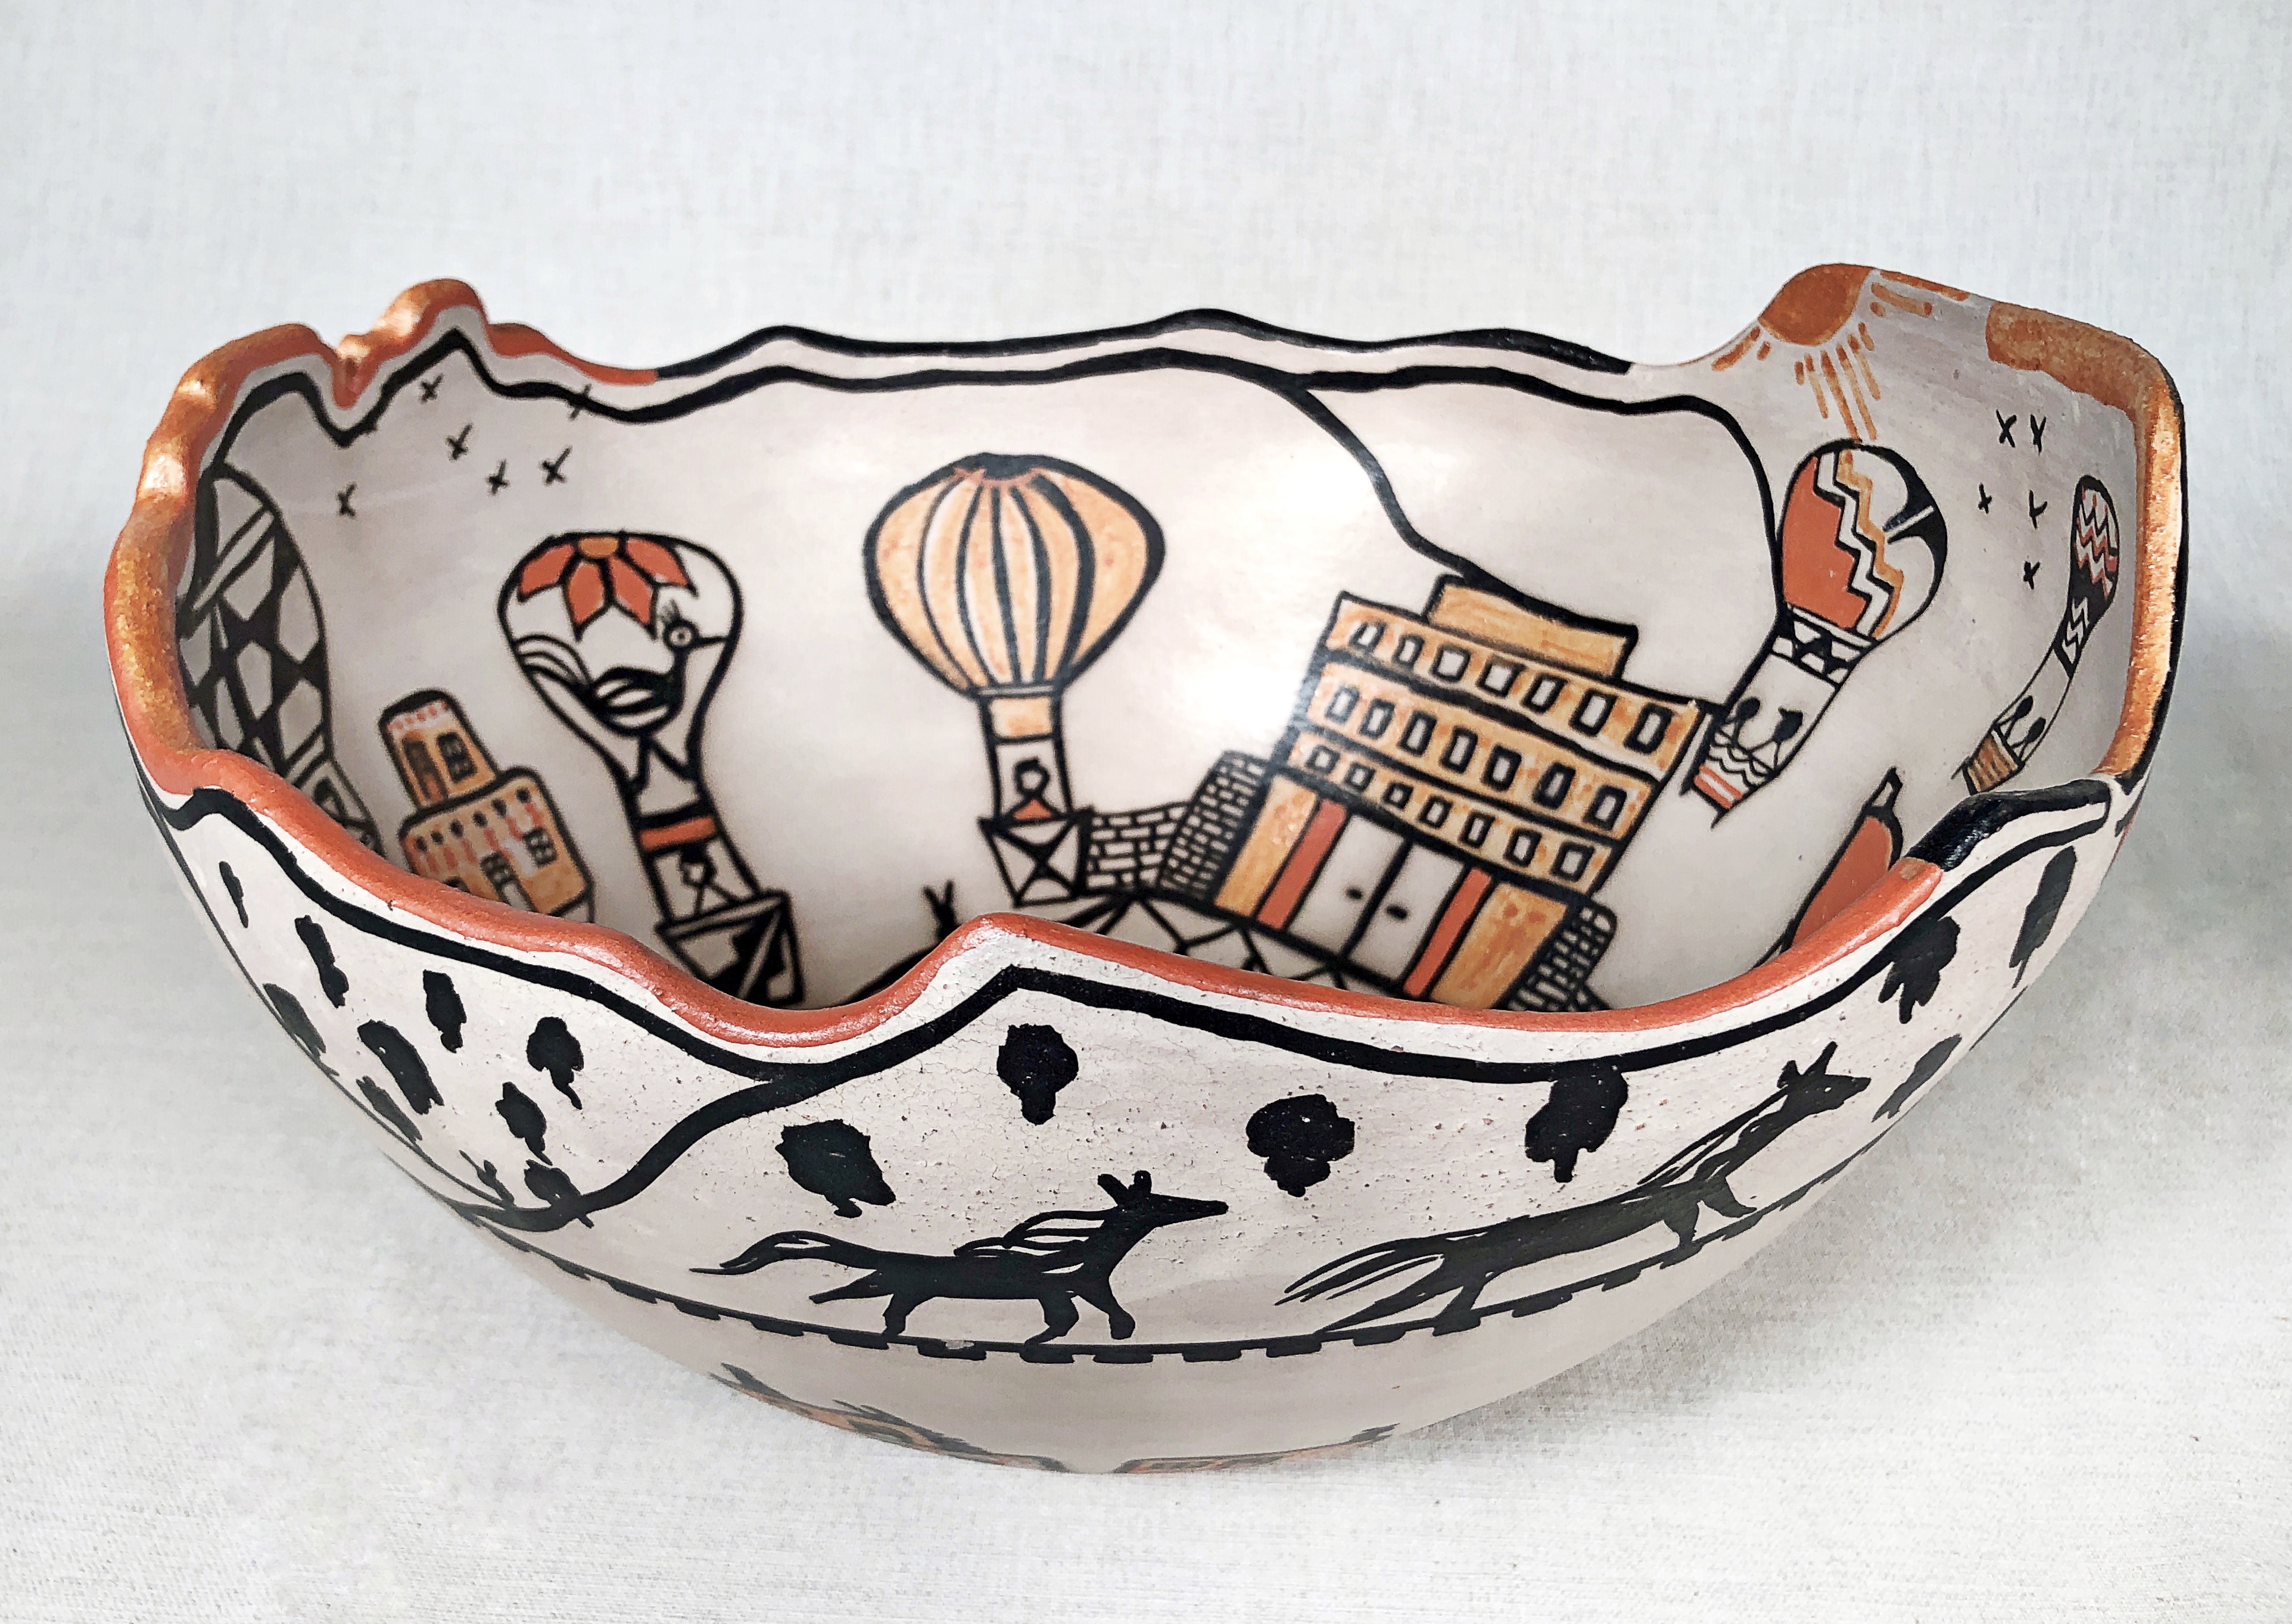 A large ceramic bowl with drawings of balloons and the Sandia Pueblo